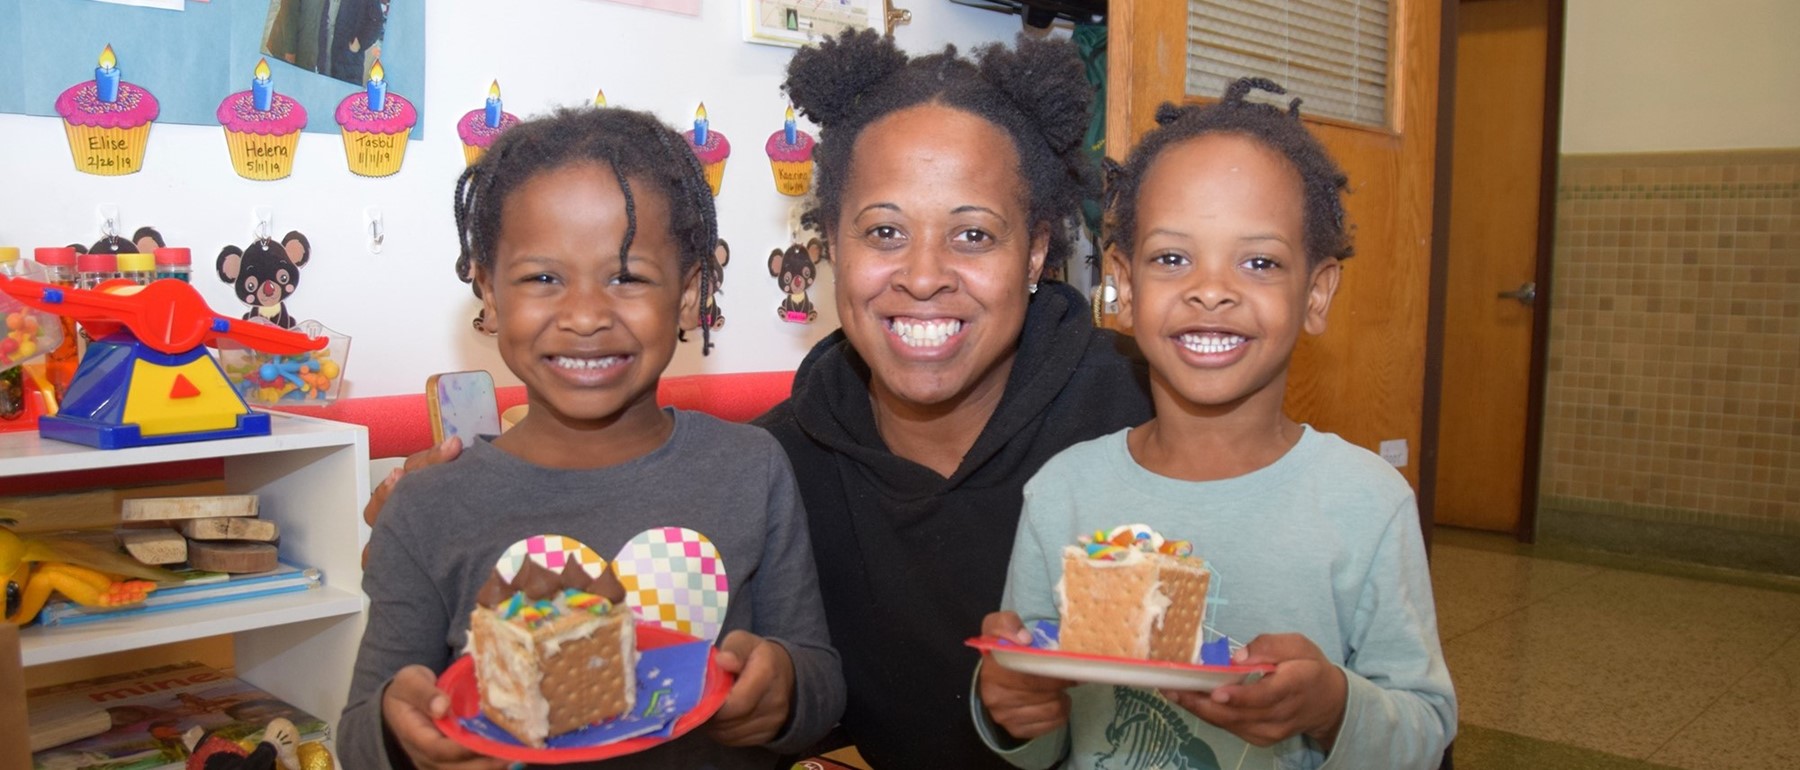 Twin Universal Pre-Kindergarten students at the Cub Care campus proudly hold their decorated gingerbread houses as they stand on each side of their mother.